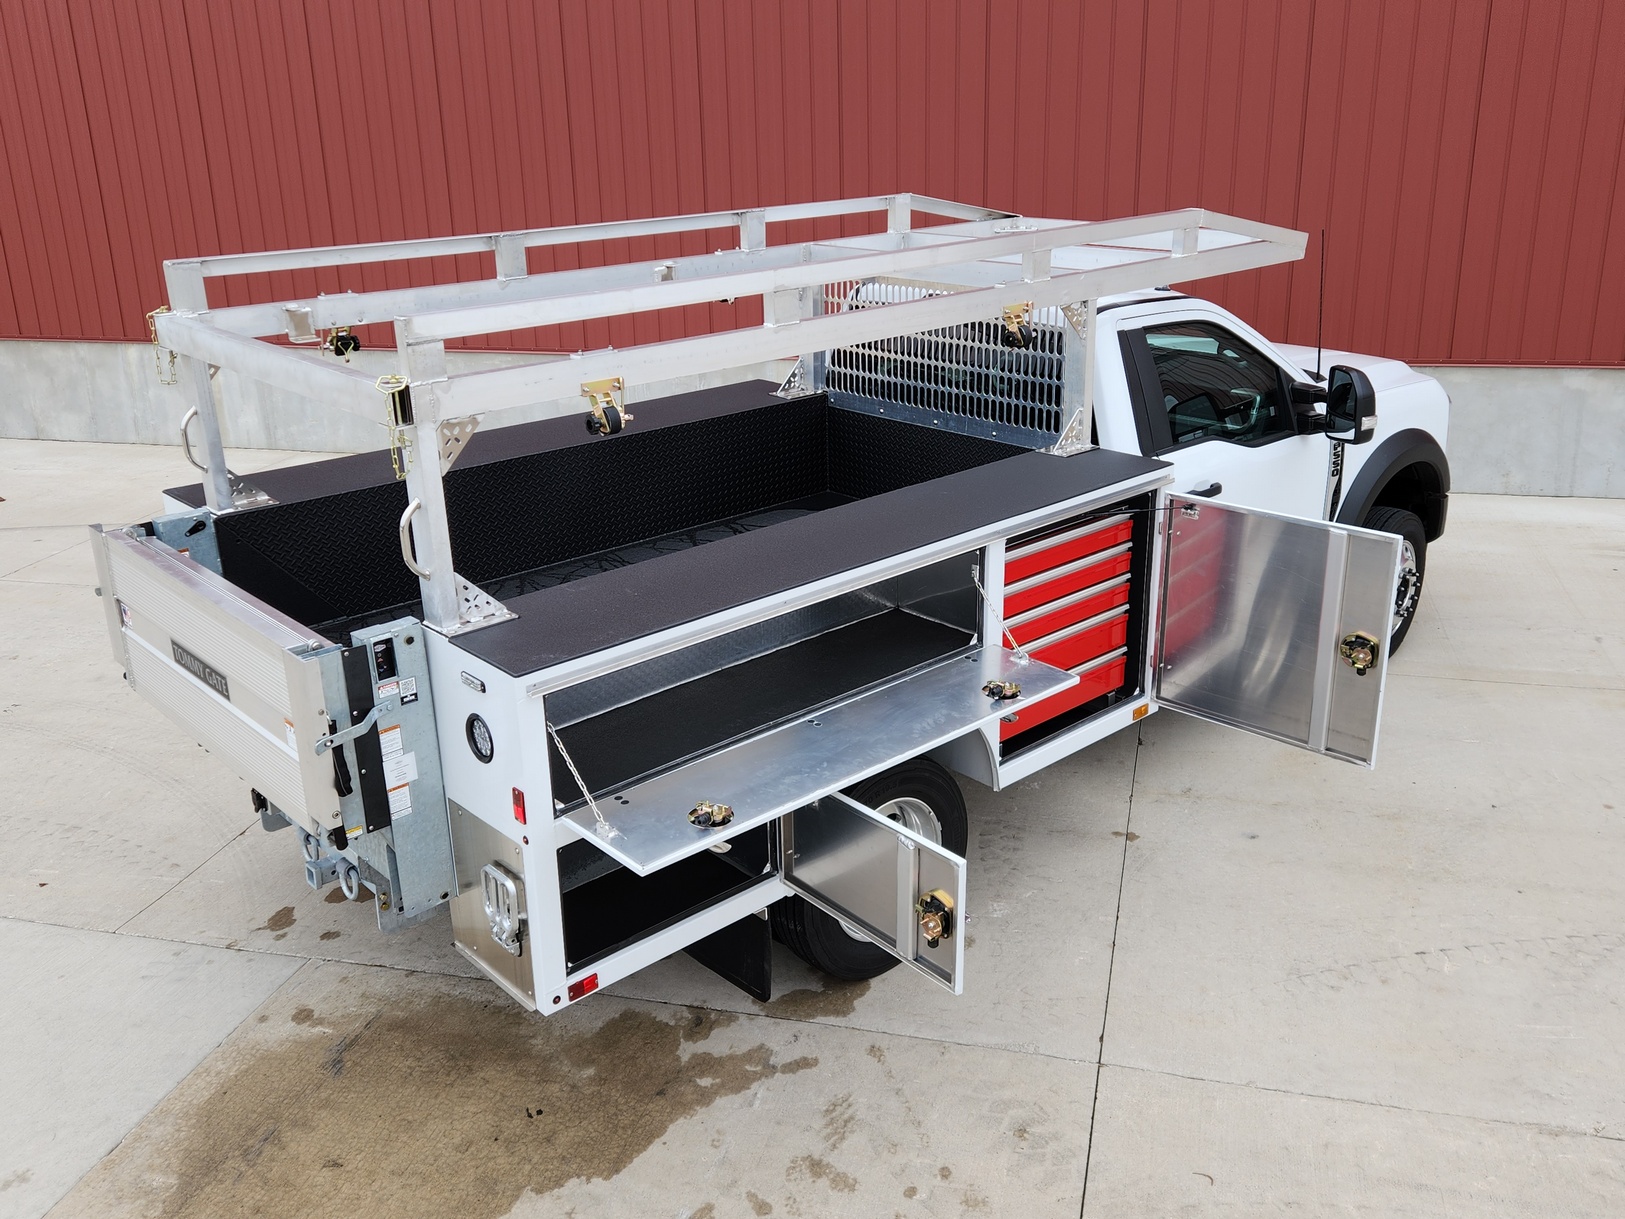 Right side rear view of a Sauber Mfg. Co. NexGen Aluminum Service Body. Shown in white with natural aluminum ladder rack and galvanized lift gate / bumper assembly with hitch. Compartment doors are open showing shelves, parts bins and storage. The truck is shown in front of a red metal building on concrete.